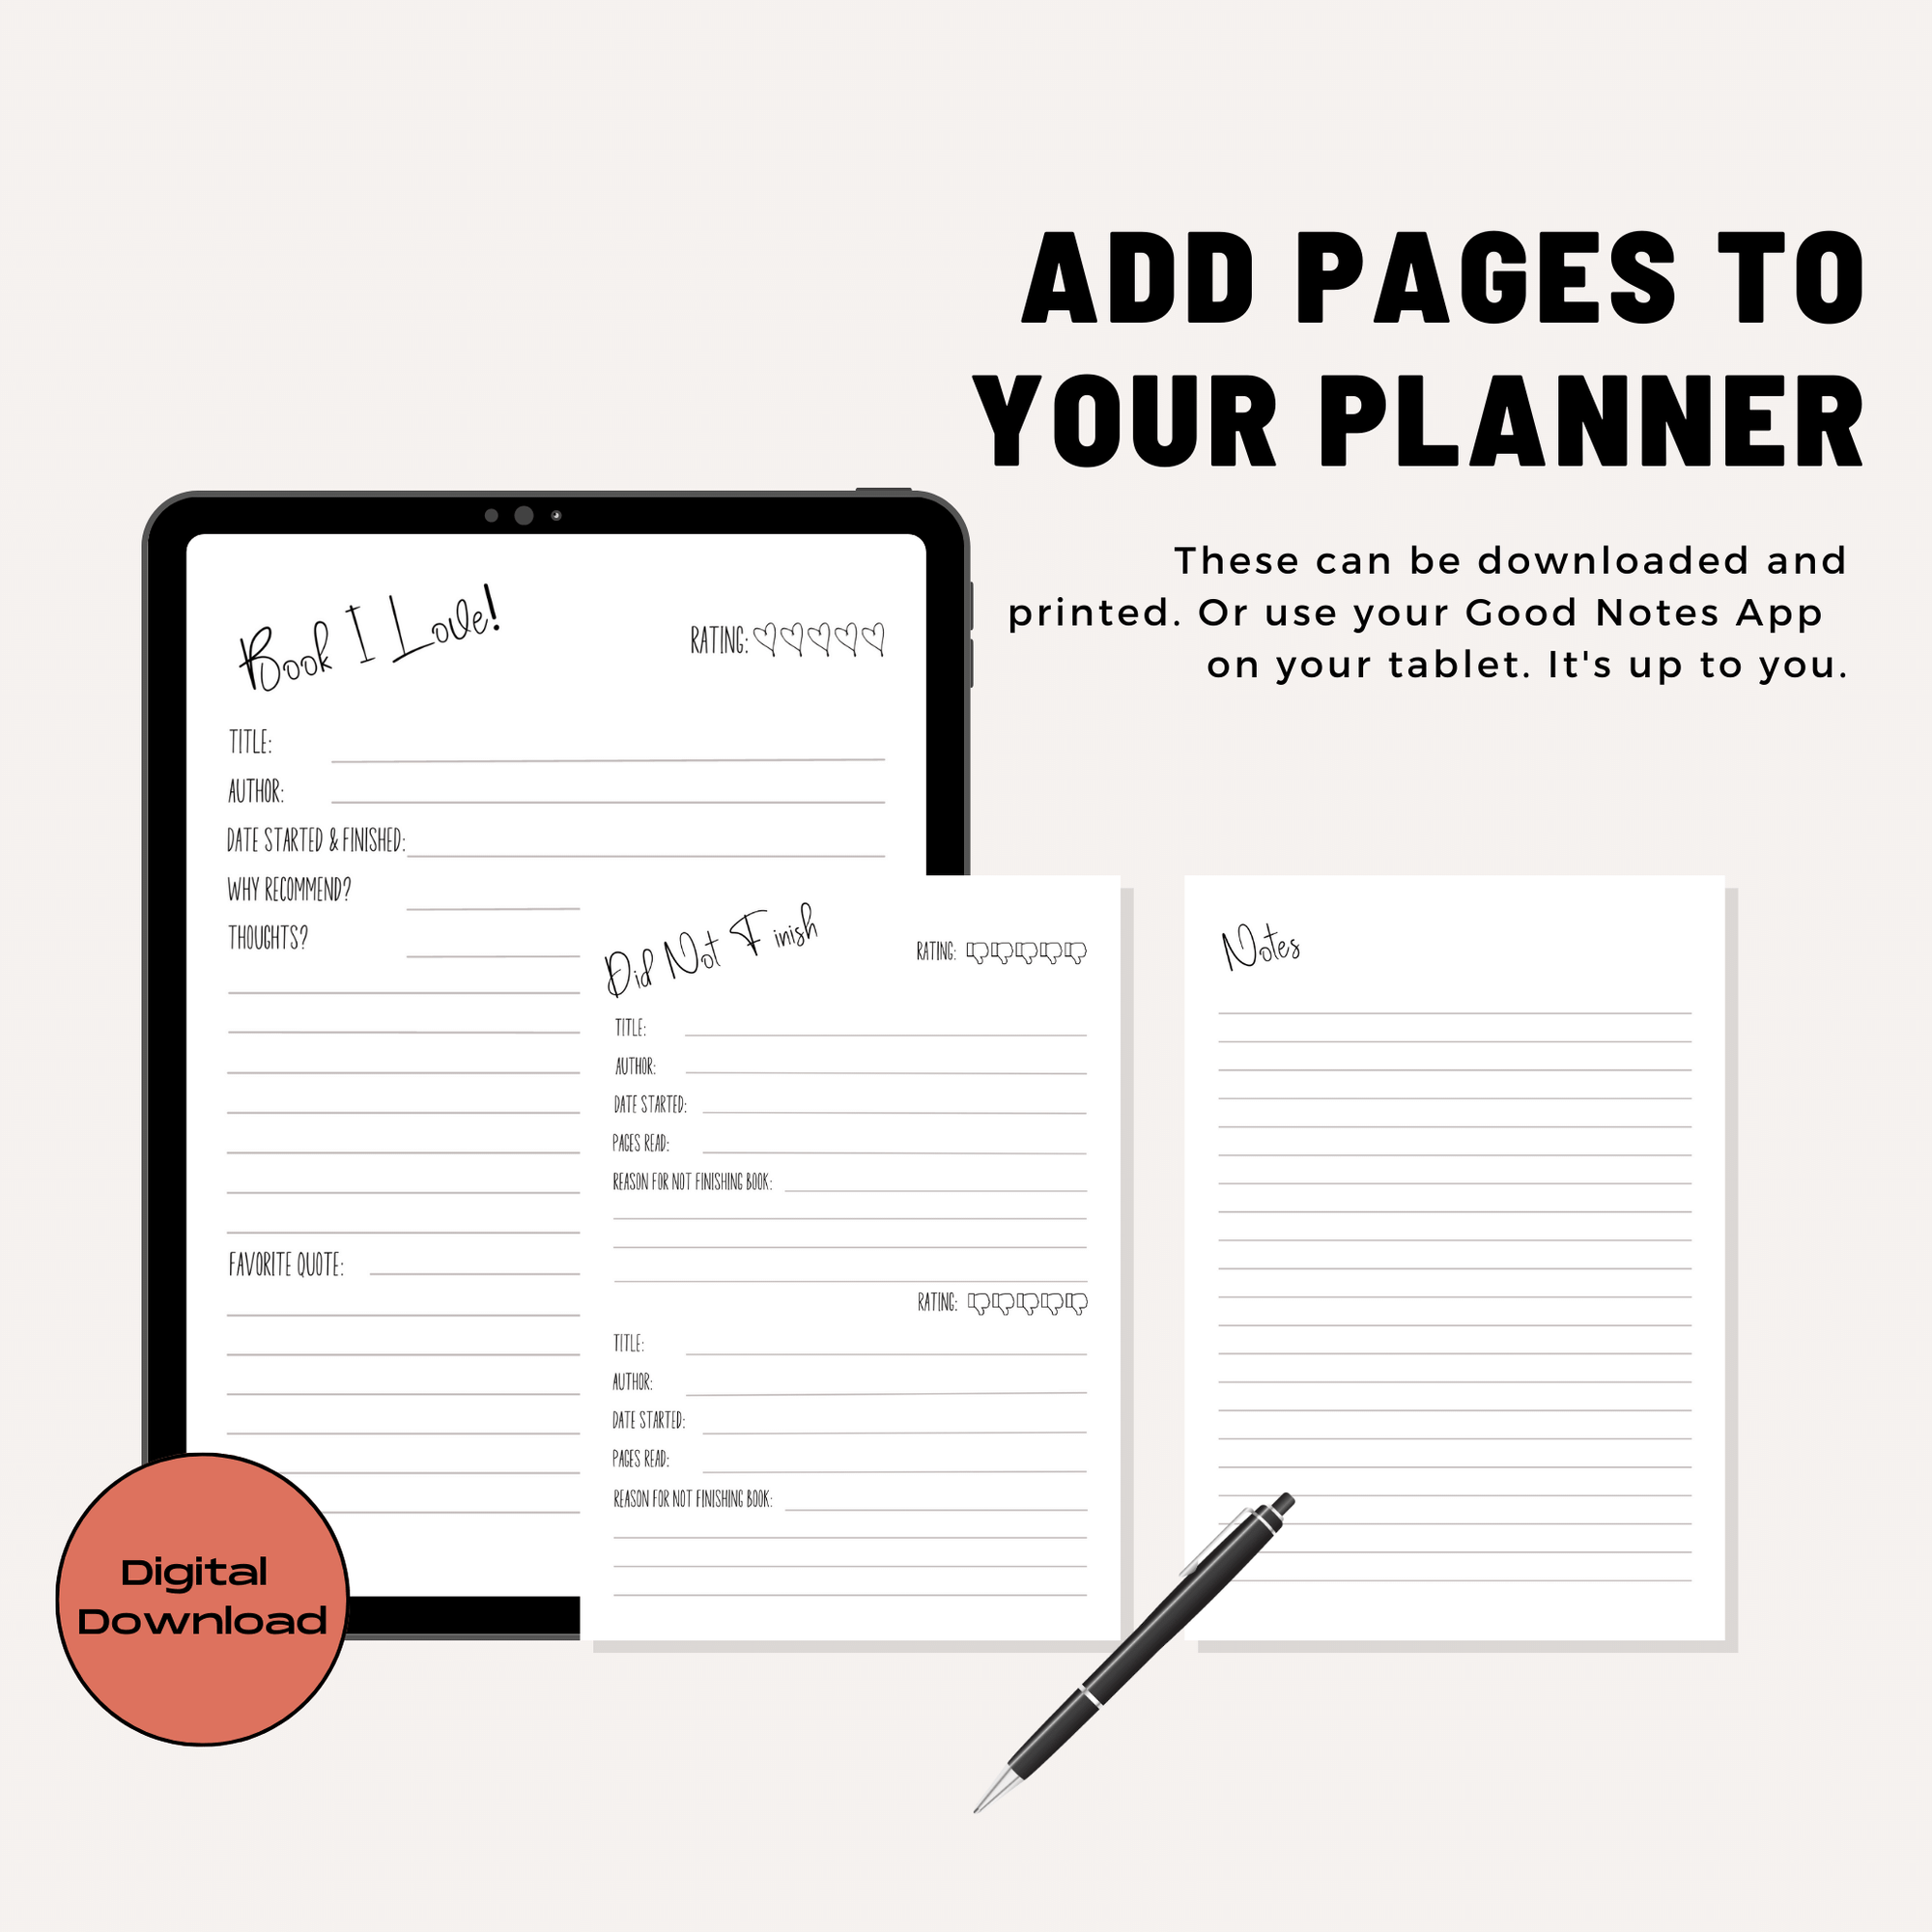 Track the Books You Love Did Not Finish Notes Page Printable Pages Rate Review Add to your Reading Planner PDF Letter A-5 Instant Download